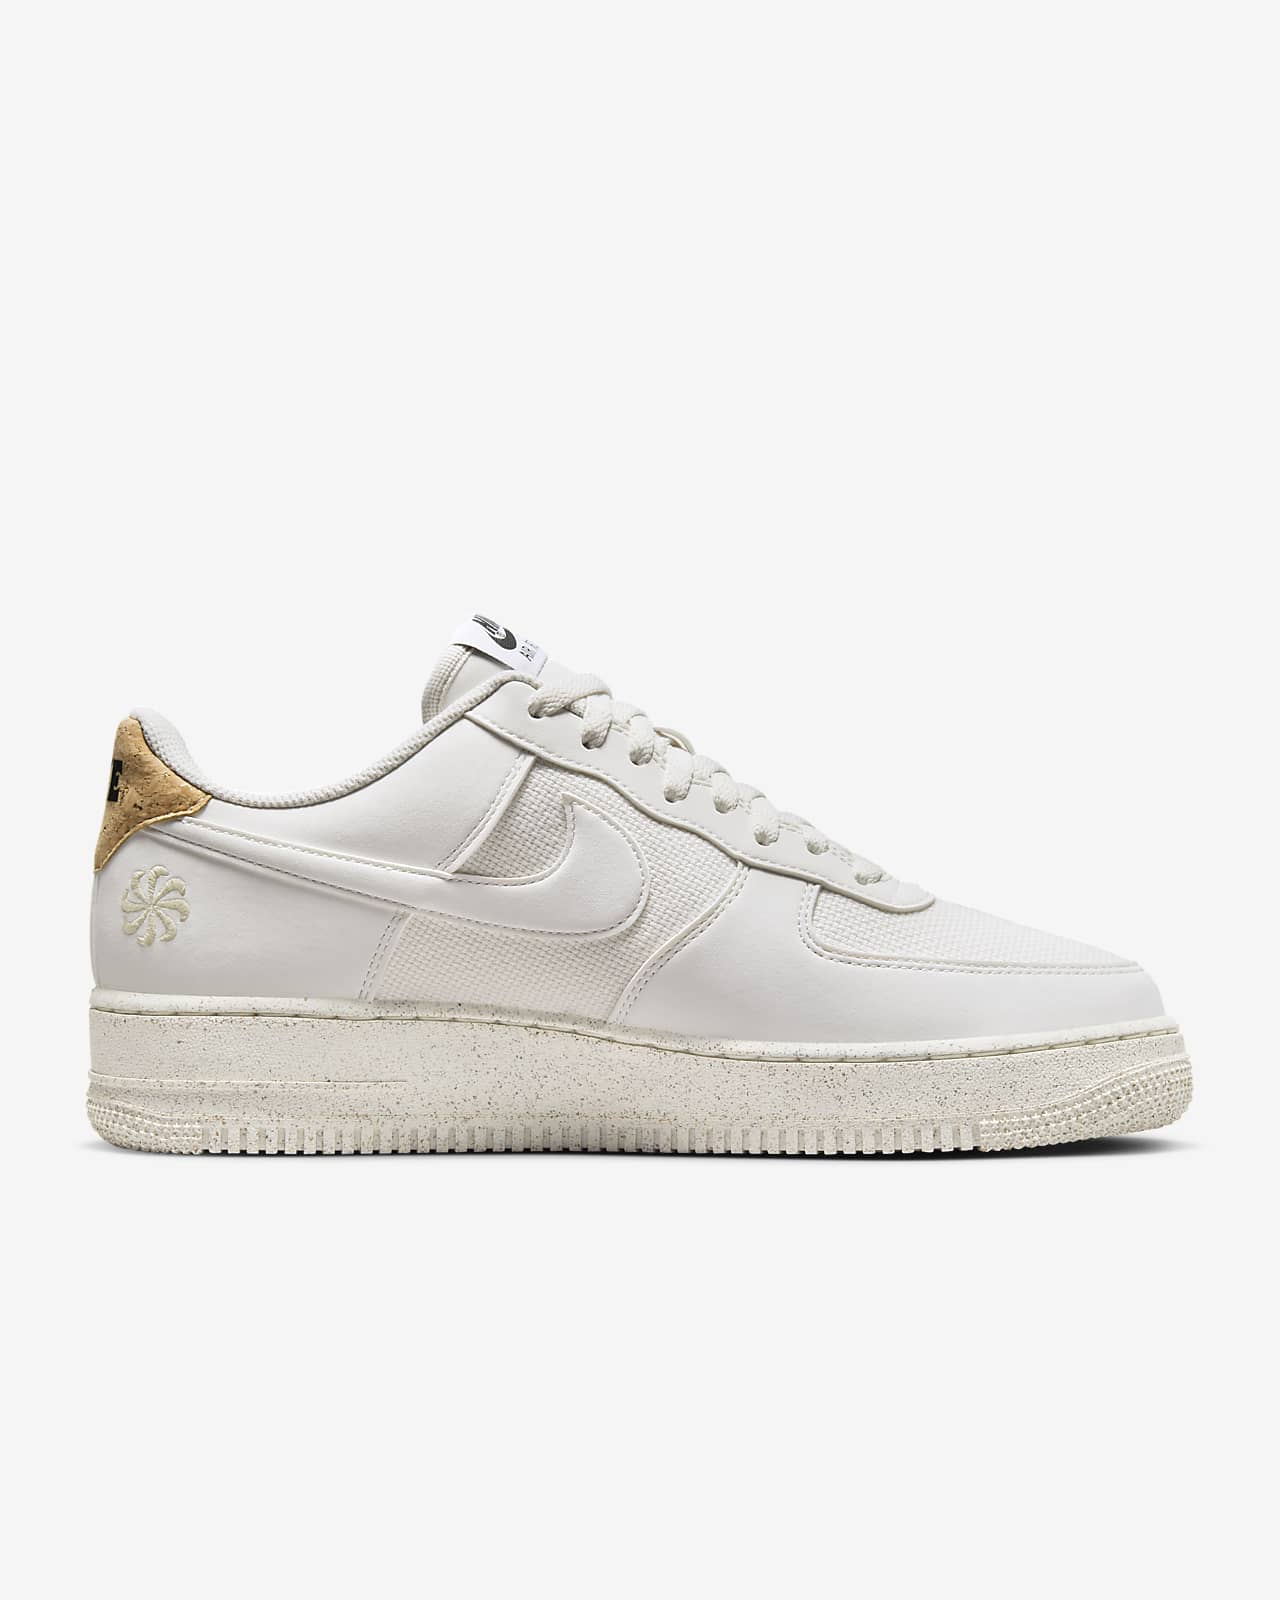 Nike Air Force 1 '07 Men's Shoes. ID